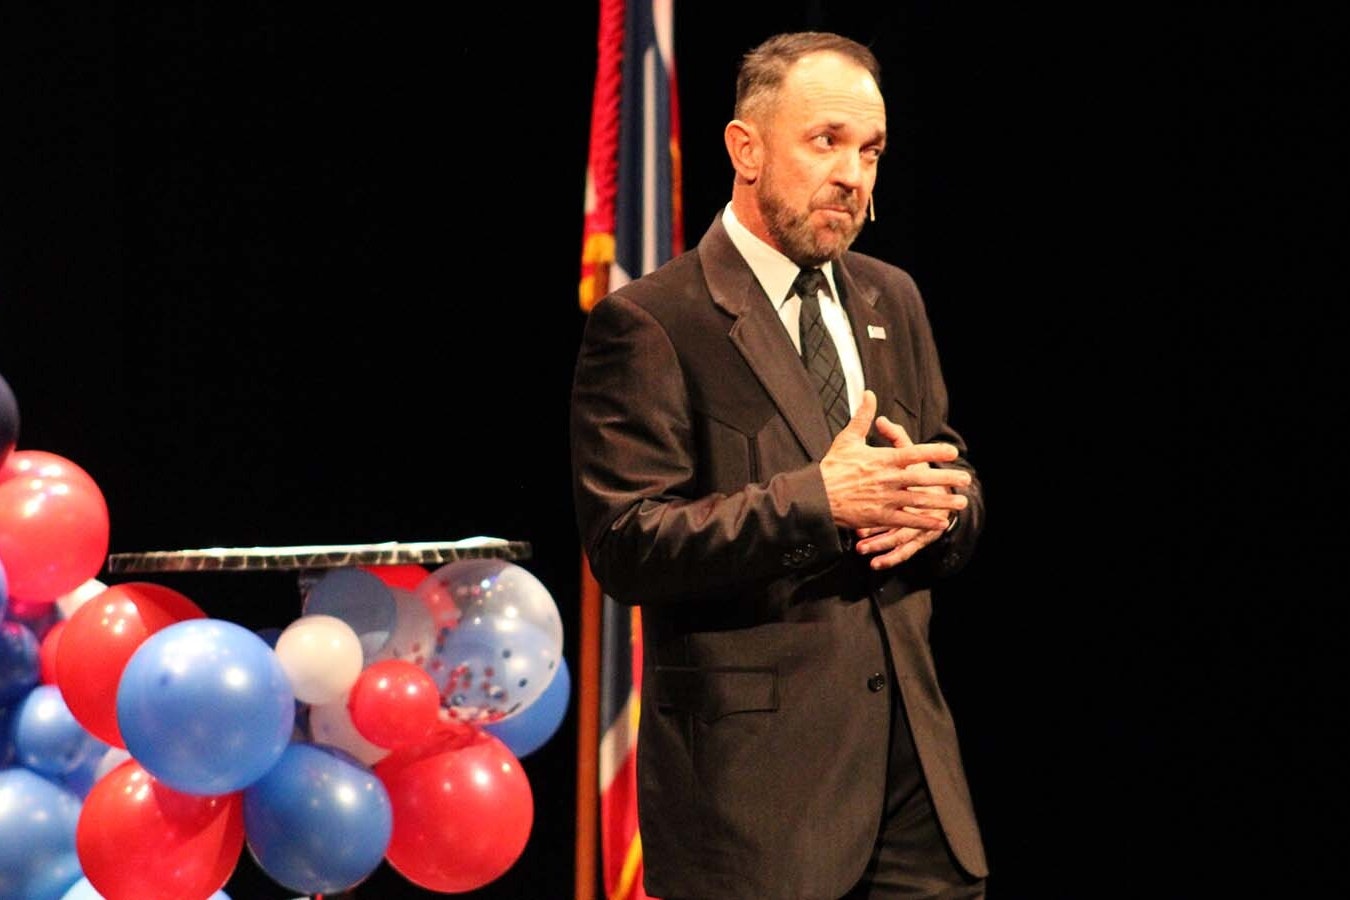 Couy Griffin, a former New Mexico county commissioner who was convicted of trespassing at the U.S. Capitol on Jan. 6, 2021, was in Gillette on Saturday, where he urged a receptive audience to fight election fraud at the local county level.